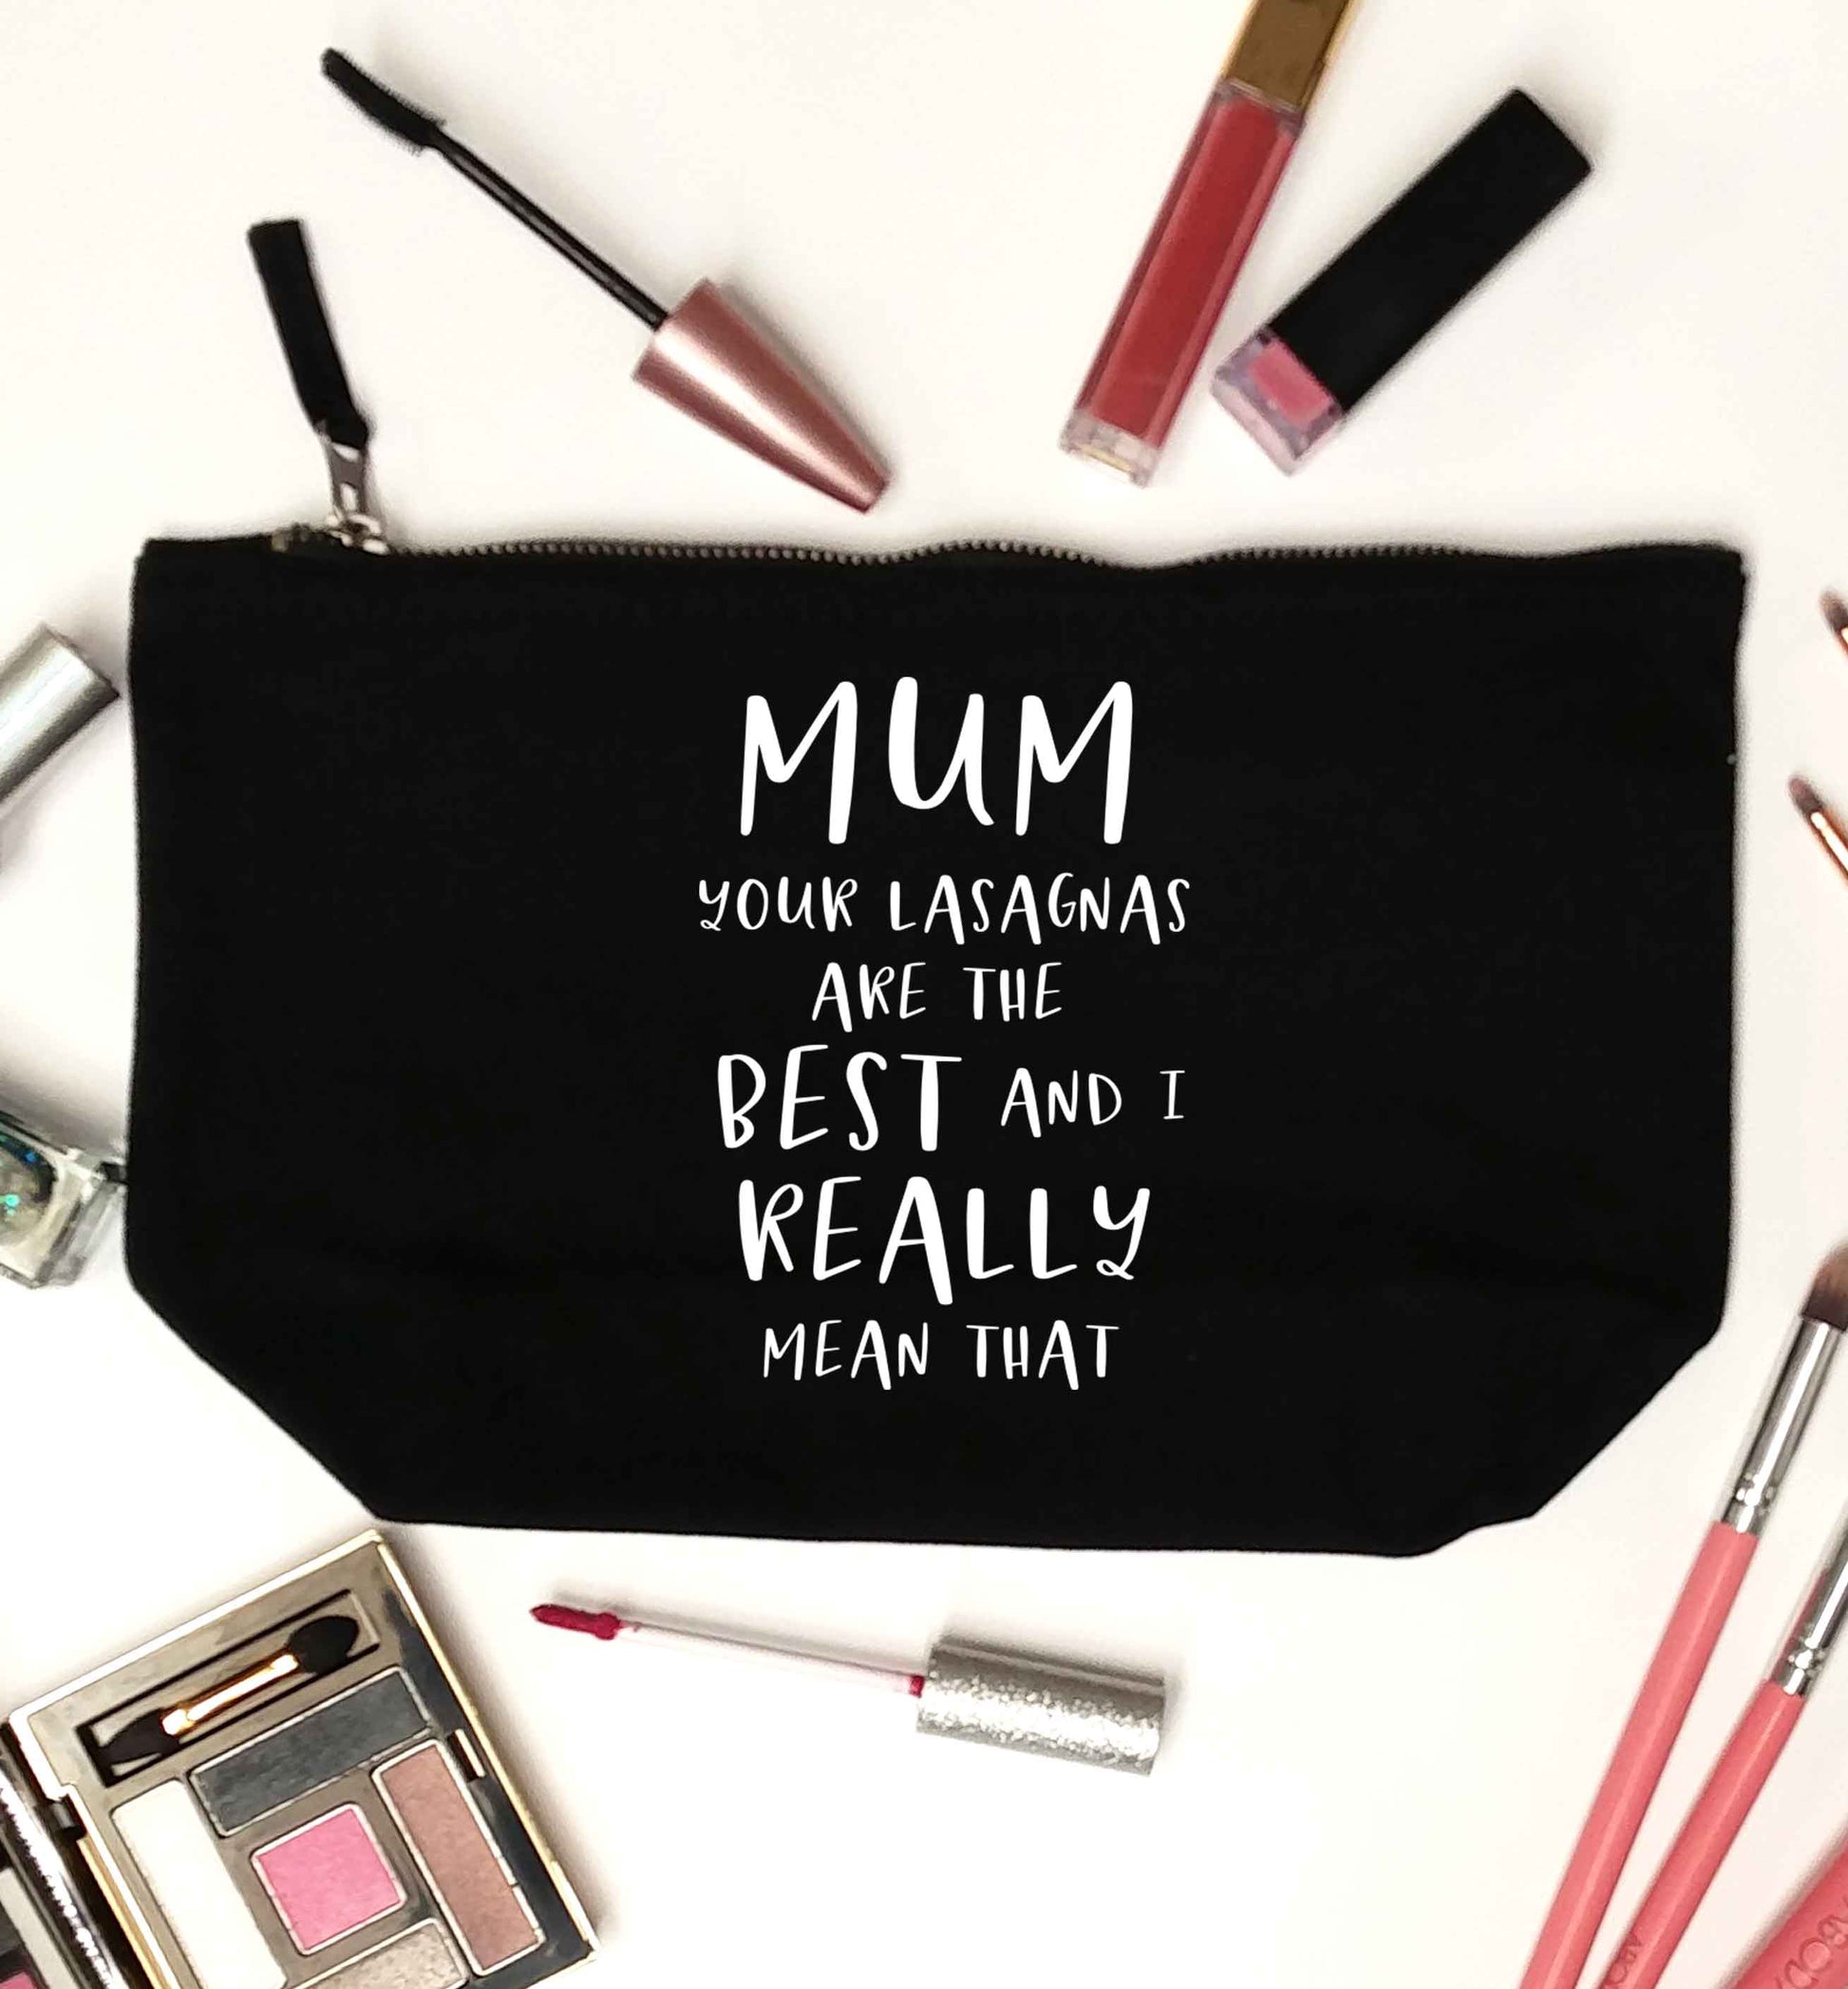 Funny gifts for your mum on mother's dayor her birthday! Mum your lasagnas are the best and I really mean that black makeup bag